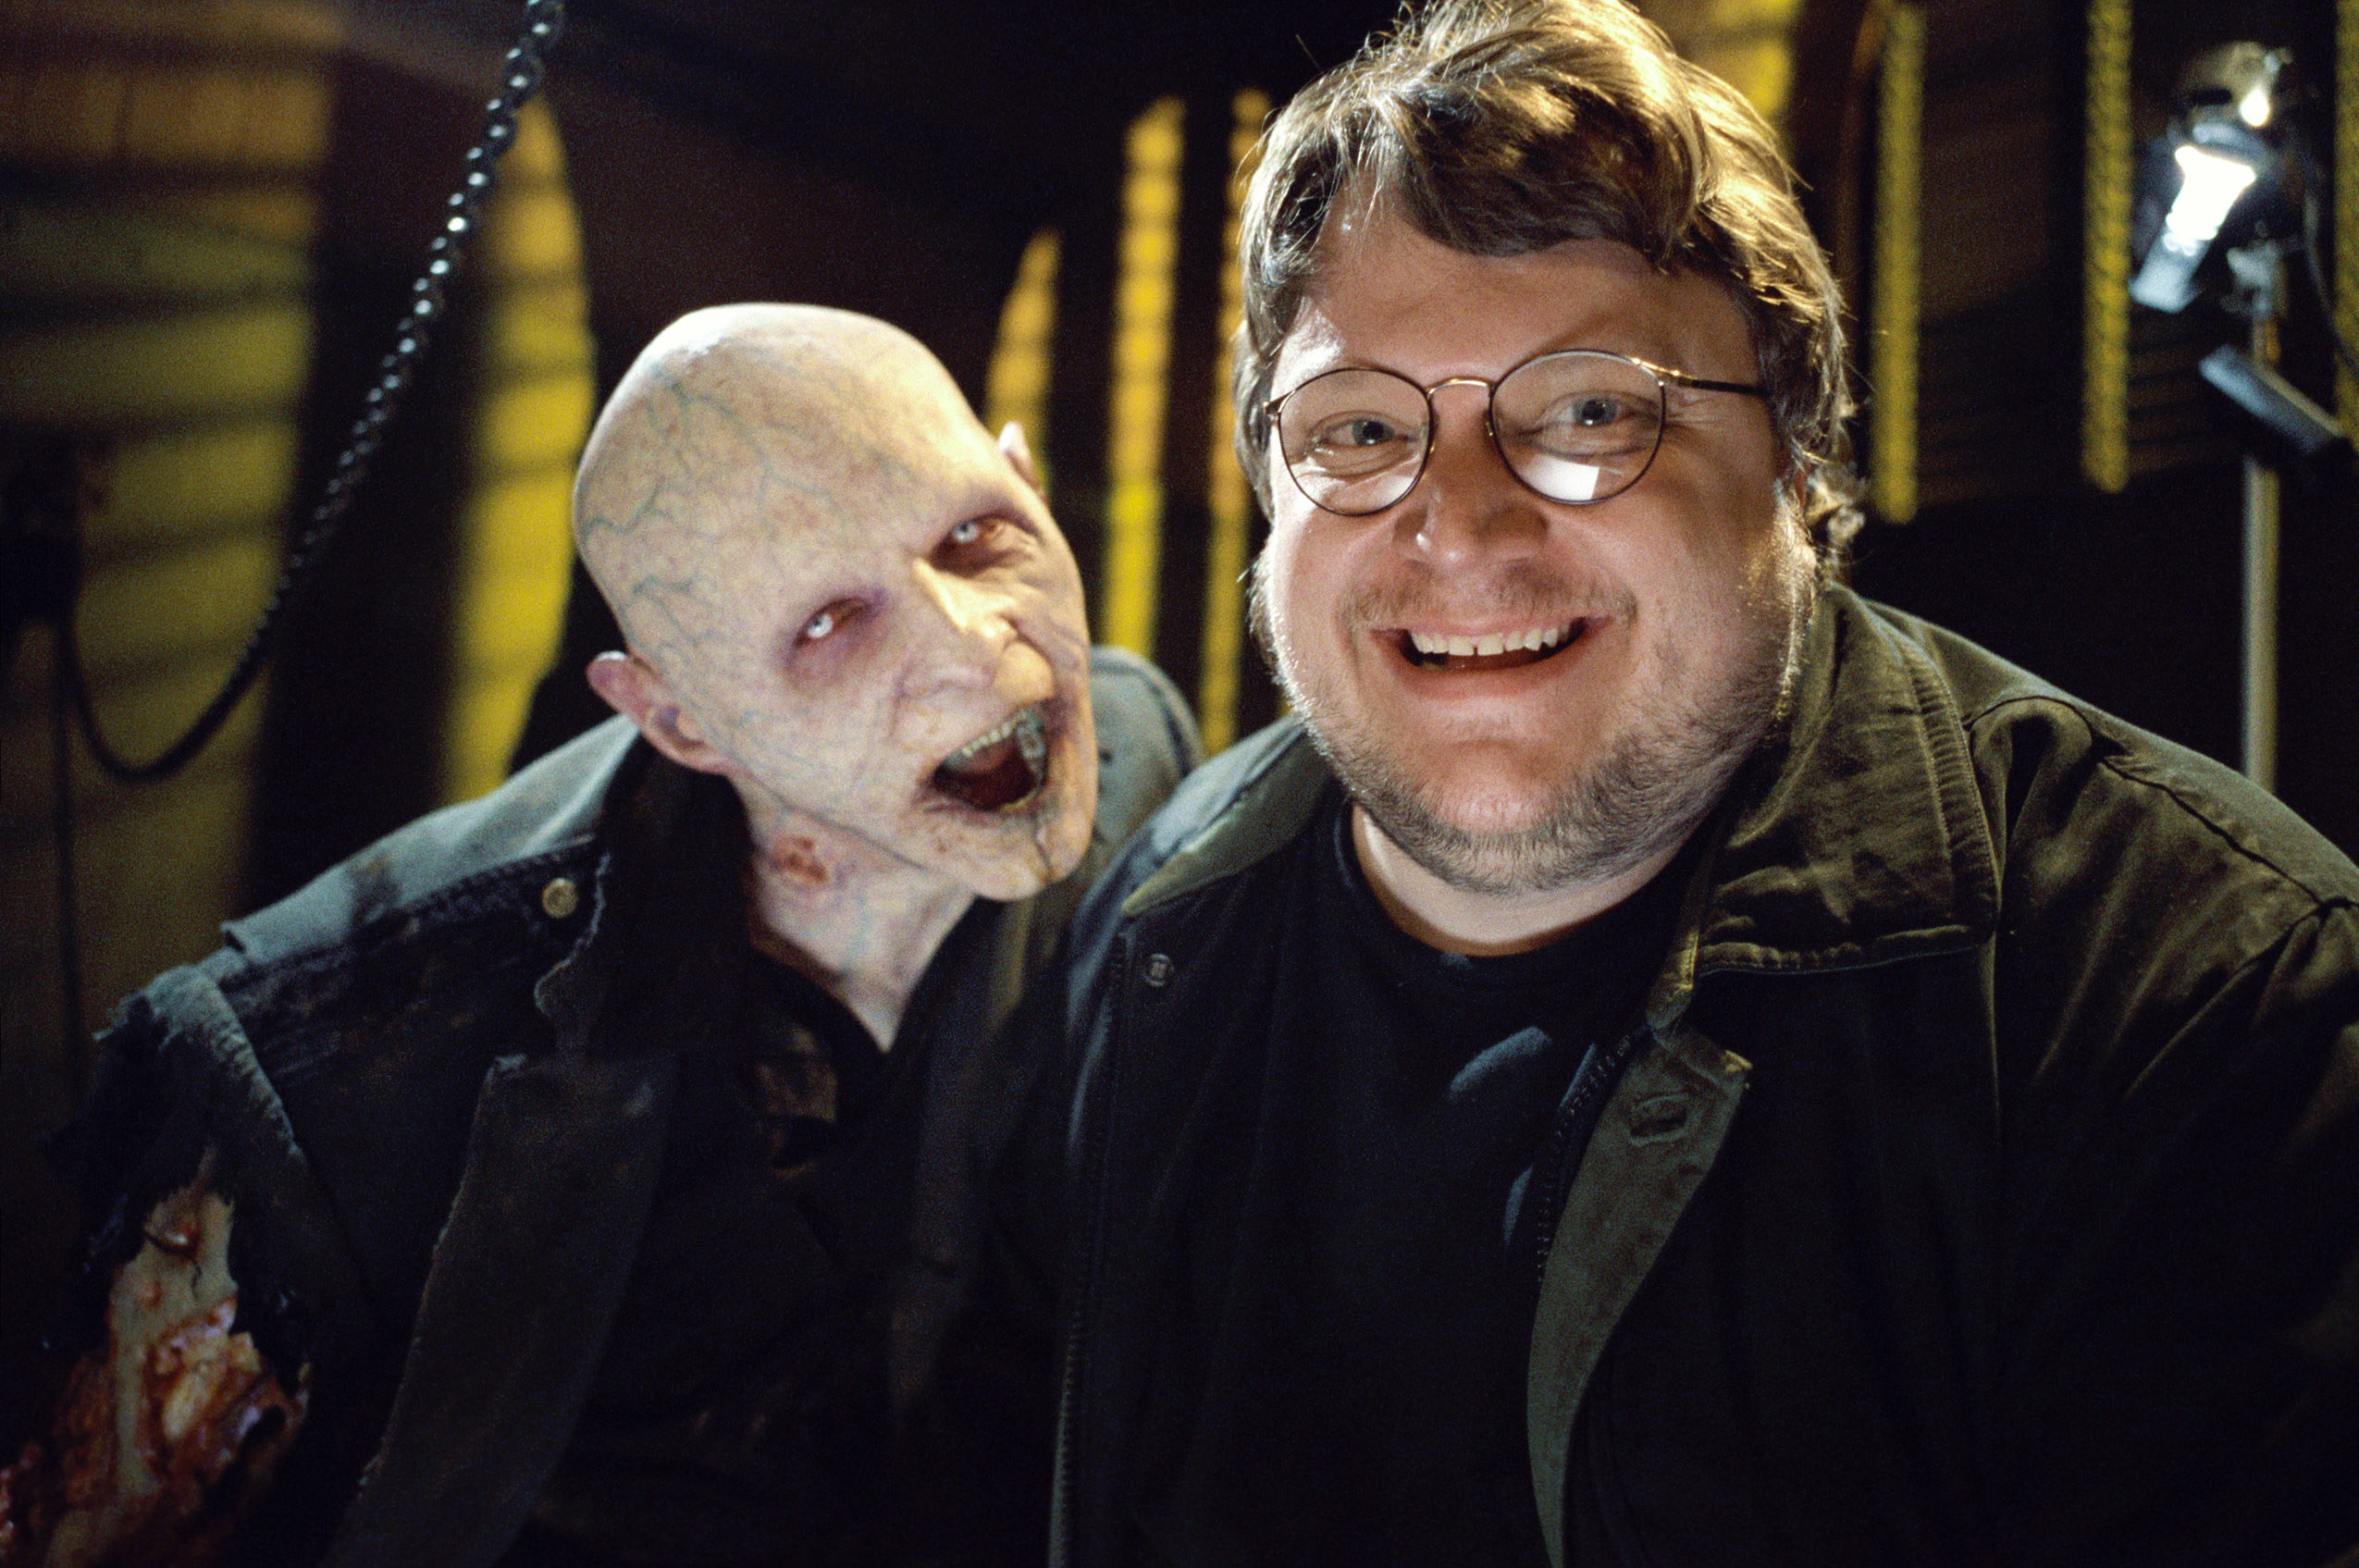 Director Guillermo Del Toro (right) and friend on the set of BLADE II